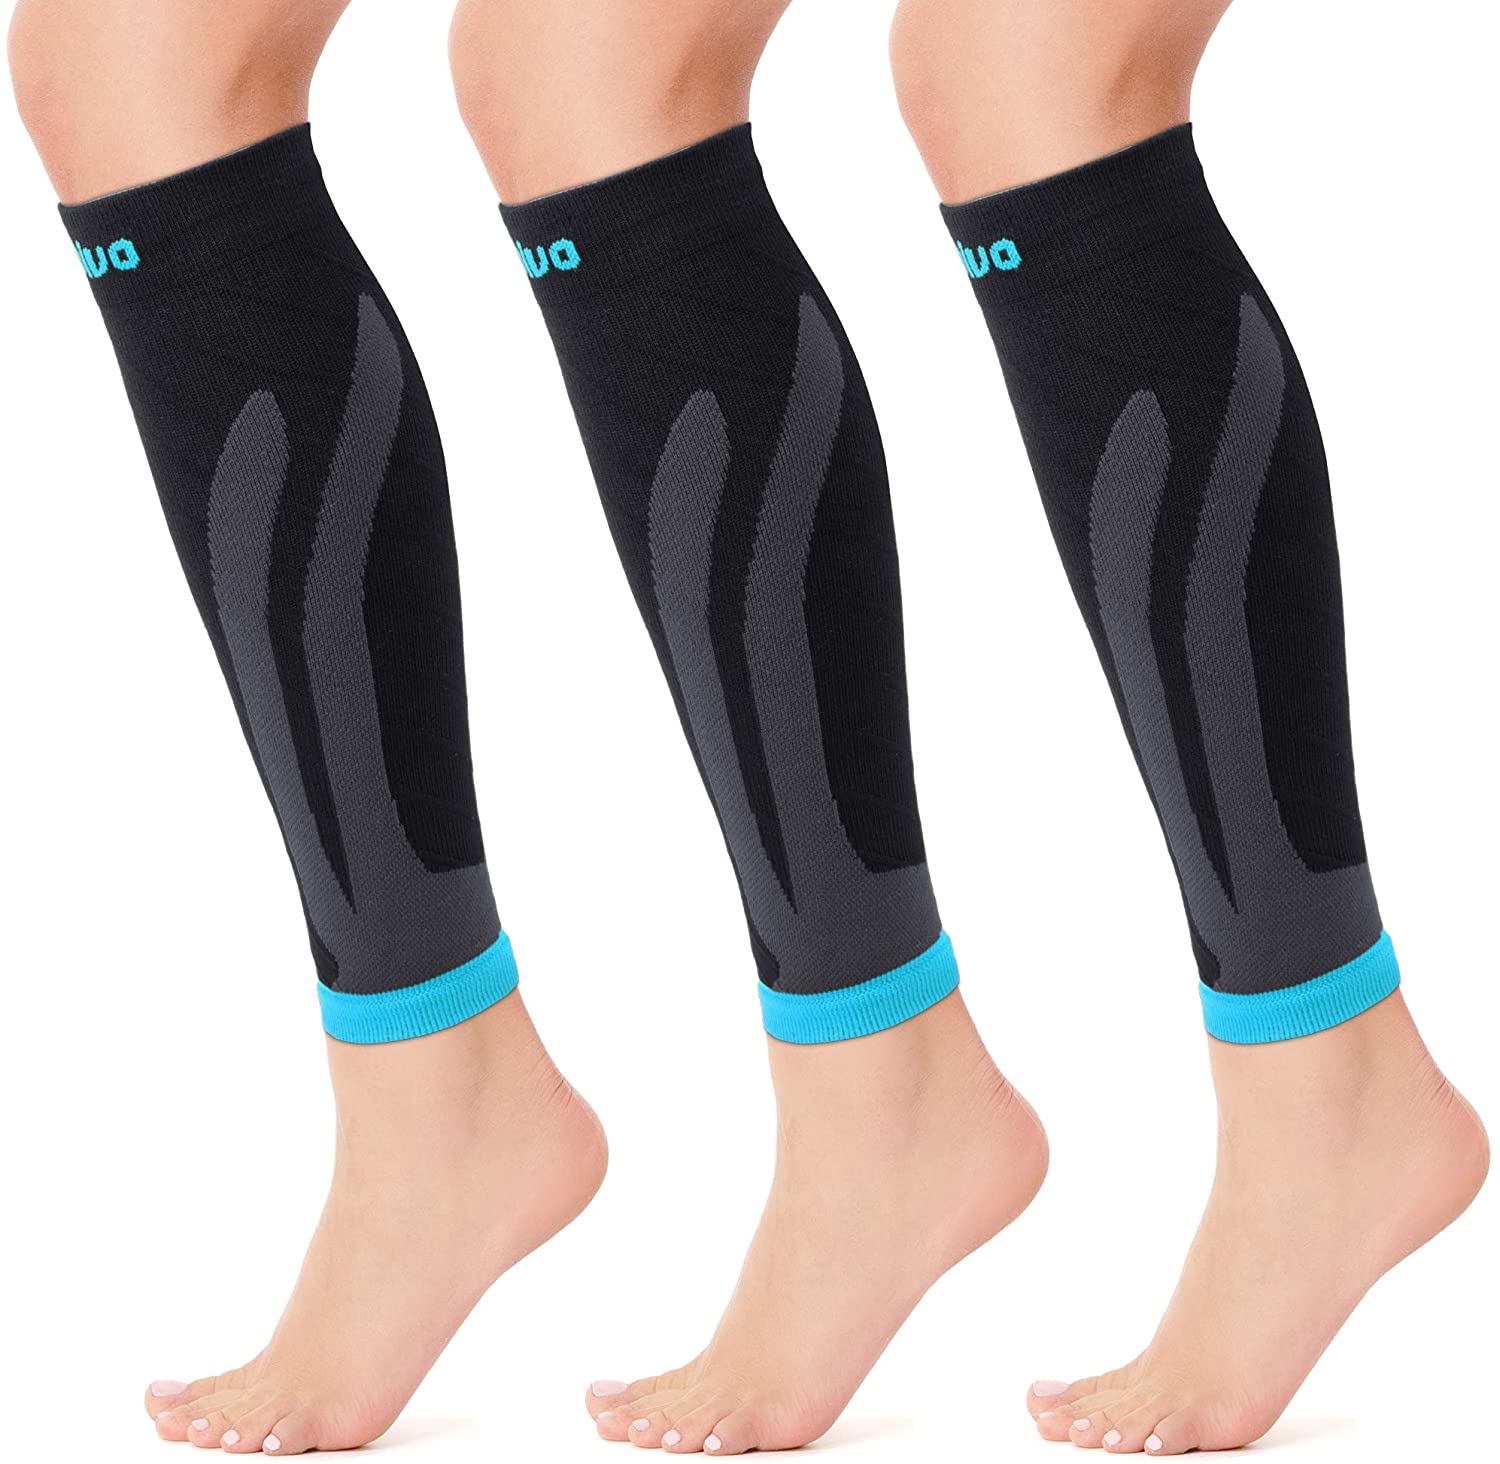  BLITZU 3 Pairs Calf Compression Sleeves for Women and Men Size  L-XL, One Orange, One Black, One White Calf Sleeve, Leg Compression Sleeve  for Calf Pain and Shin Splints. Footless Compression